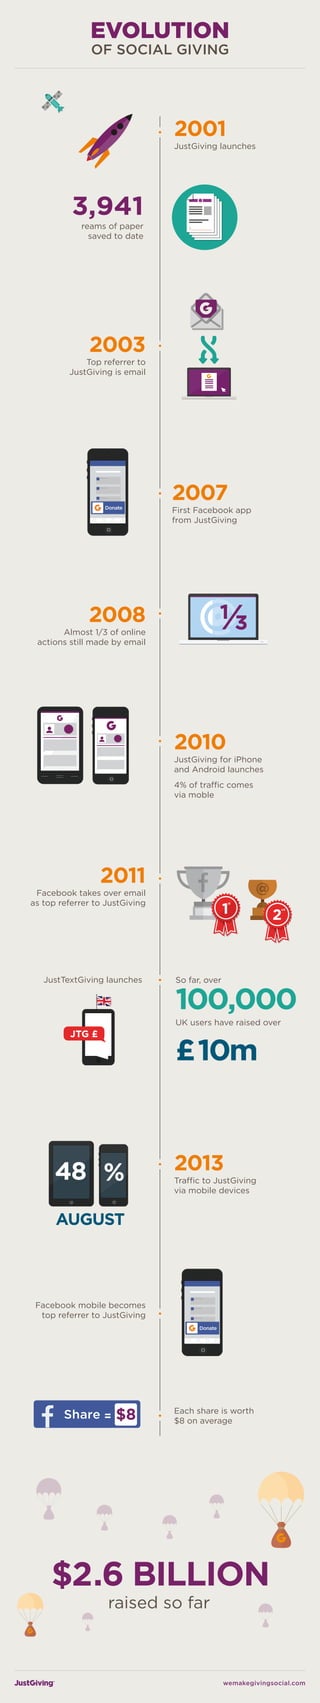 2001

JustGiving launches

3,941
reams of paper
saved to date

2003

Top referrer to
JustGiving is email

2007

First Facebook app
from JustGiving

2008

Almost 1/3 of online
actions still made by email

2010

JustGiving for iPhone
and Android launches
4% of traffic comes
via moble

2011

Facebook takes over email
as top referrer to JustGiving

JustTextGiving launches

So far, over

100,000
UK users have raised over

£ 10m

2013

Traffic to JustGiving
via mobile devices

Facebook mobile becomes
top referrer to JustGiving

Each share is worth
$8 on average

wemakegivingsocial.com

 